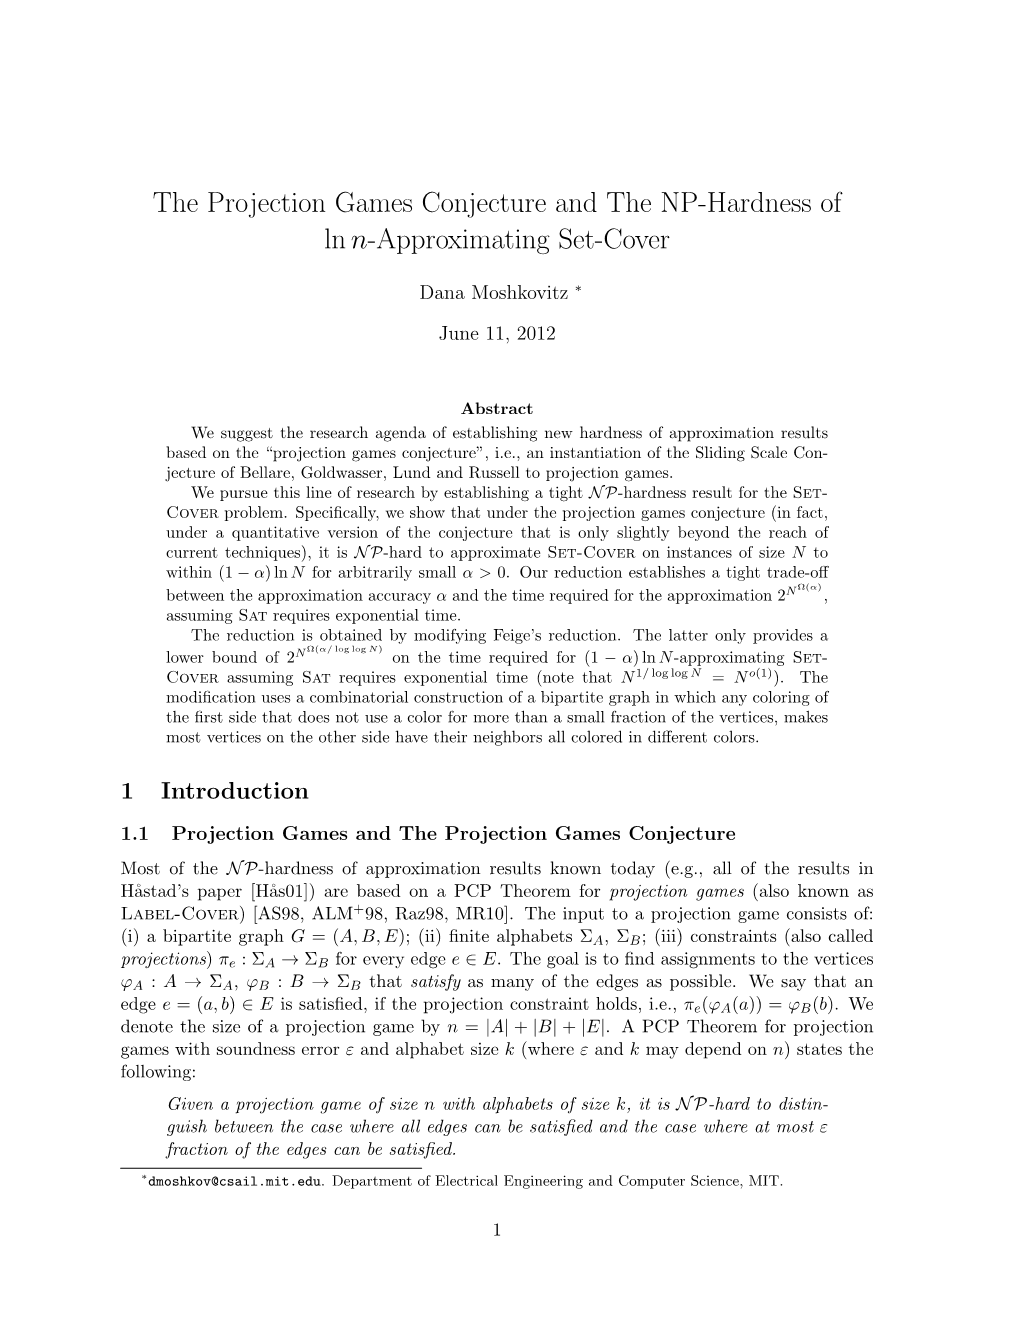 The Projection Games Conjecture and the NP-Hardness of Ln N-Approximating Set-Cover